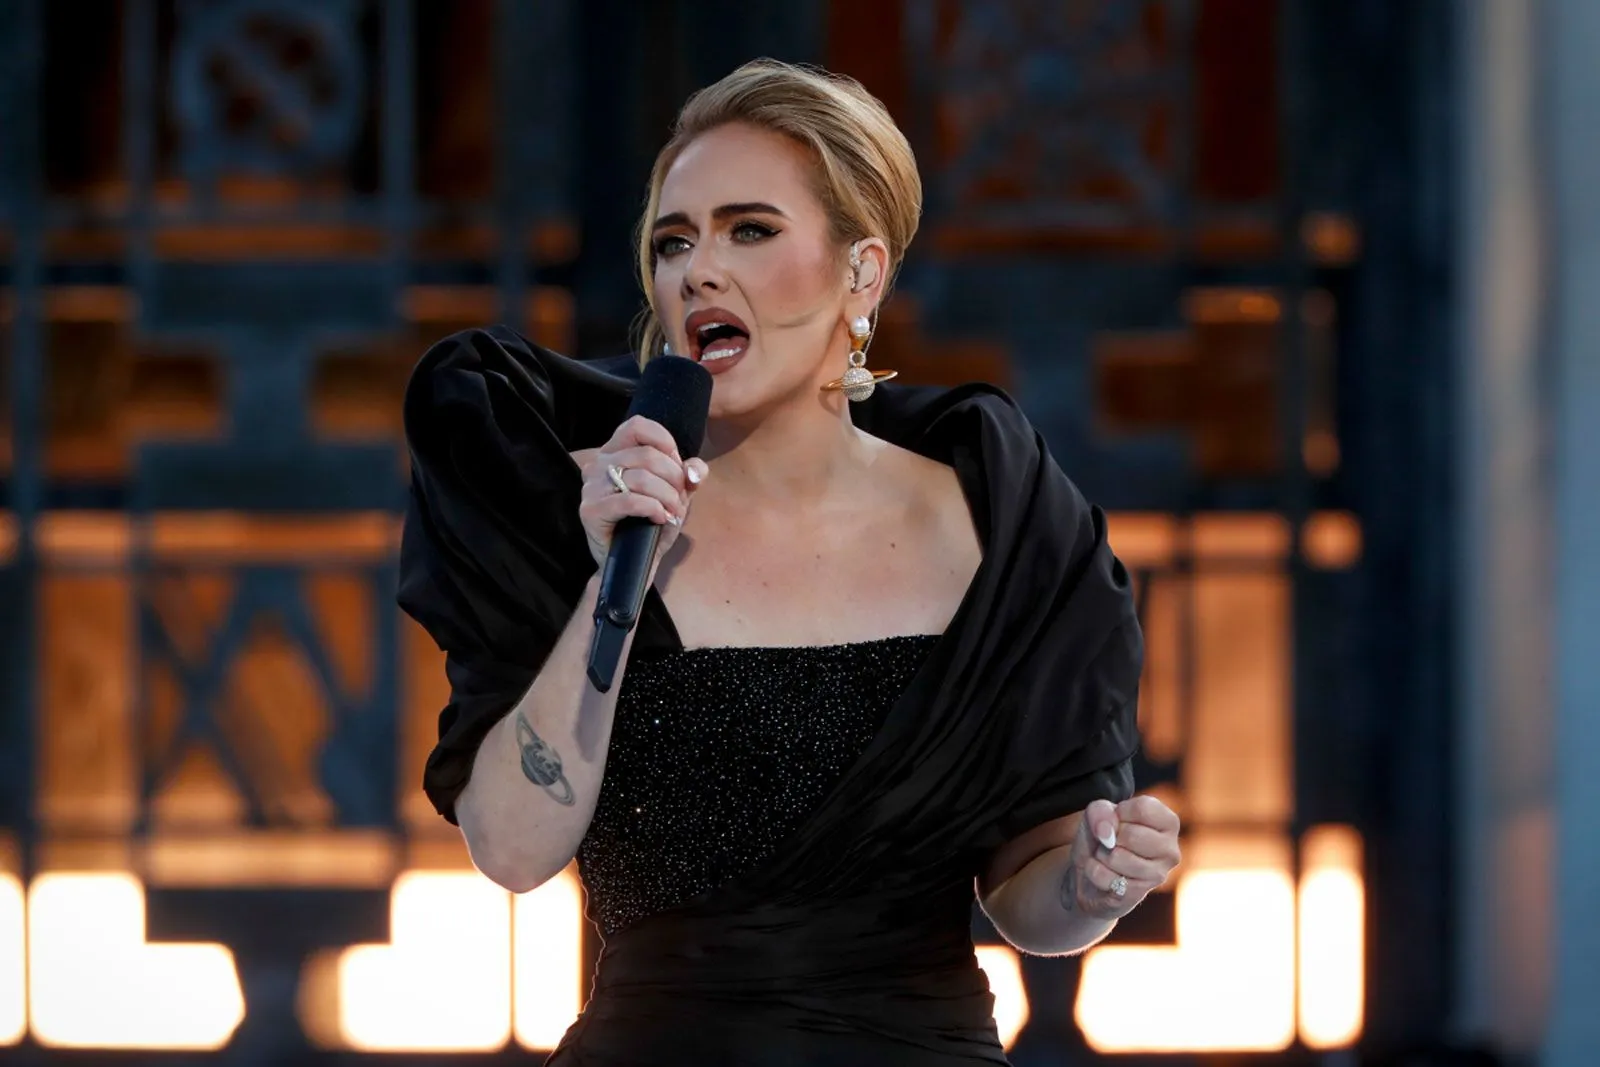 Is Adele Taking a Break or Leaving Music Entirely?